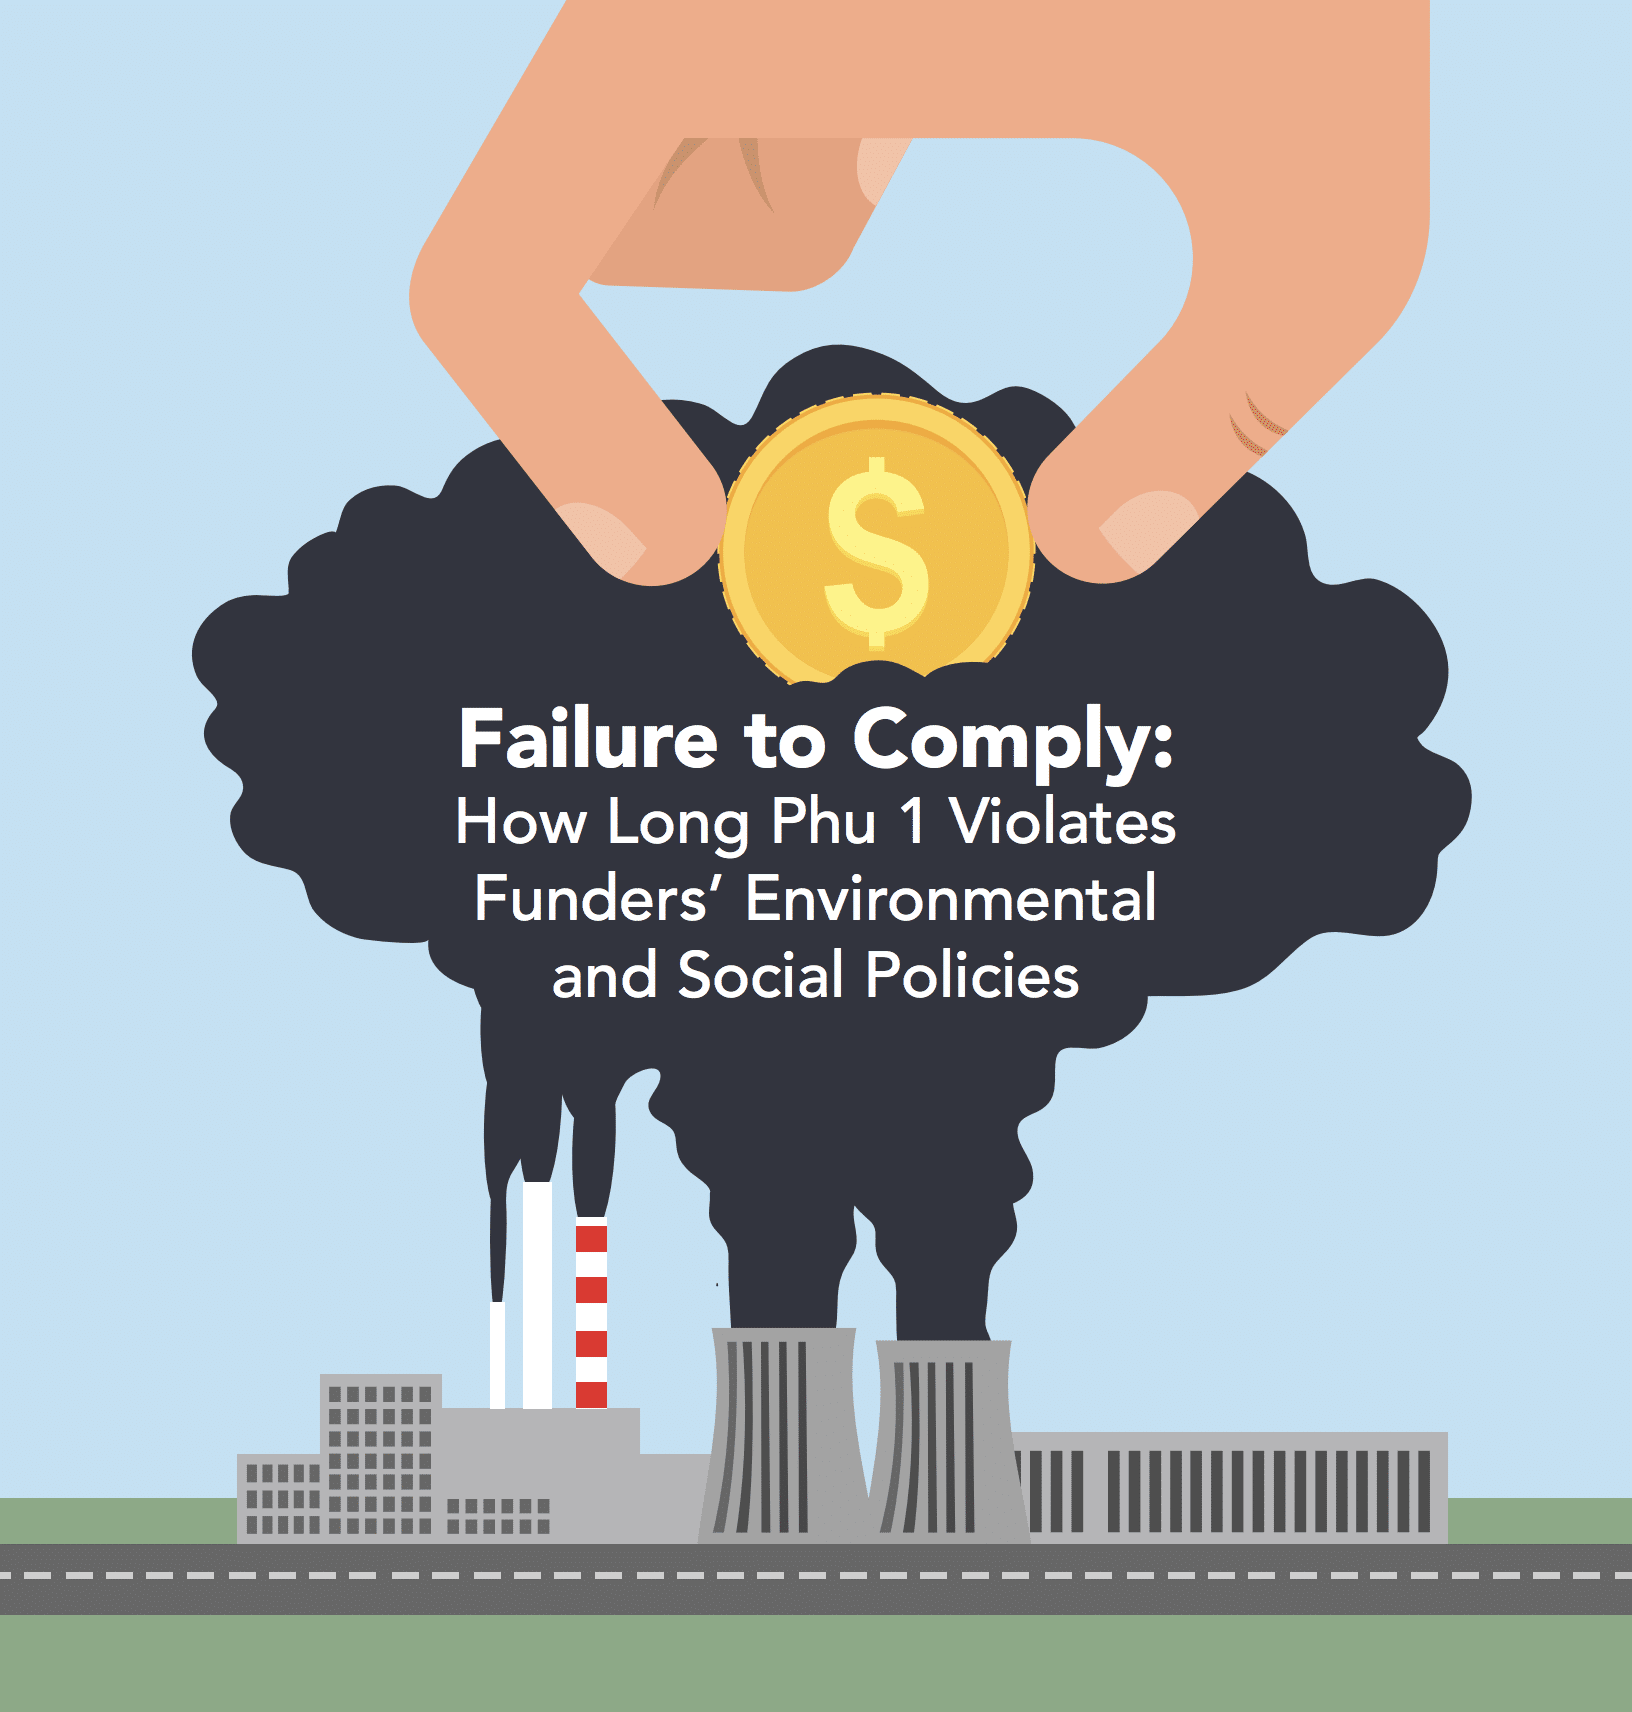 Failure to Comply: How Long Phu 1 Violates Funders’ Environmental and Social Policies